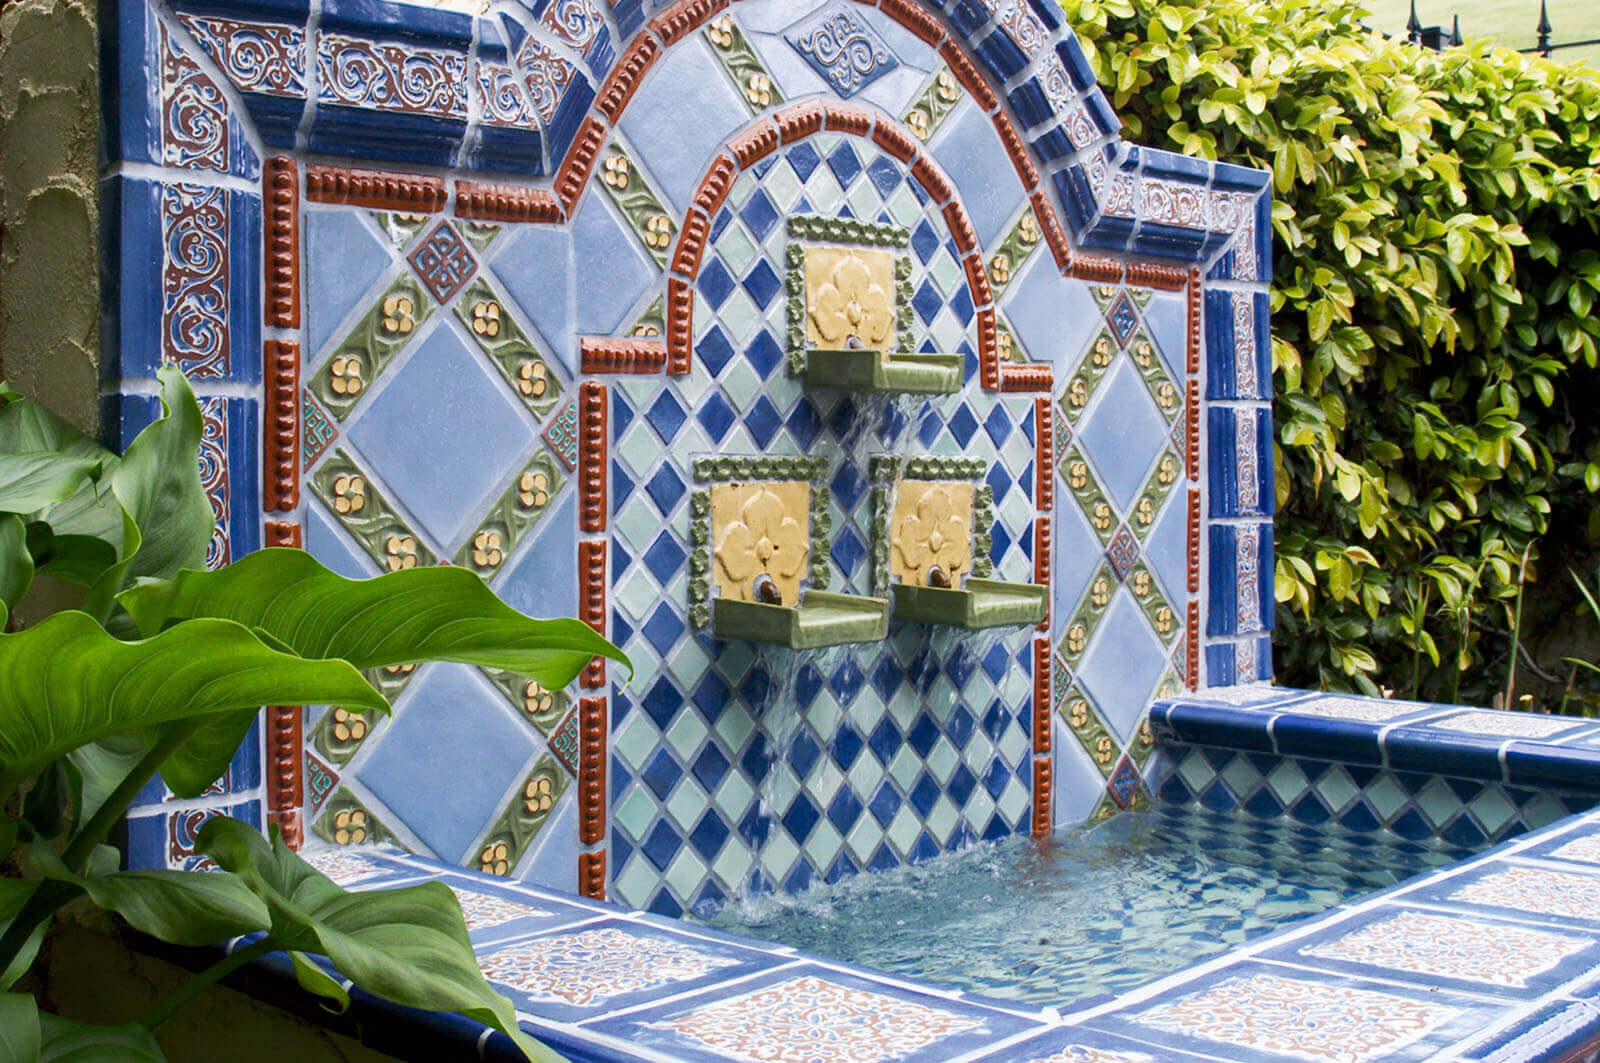 Embellish - Delaplane - Artistic mosaic wall fountain with blue, red, and green tiles, and pool basin